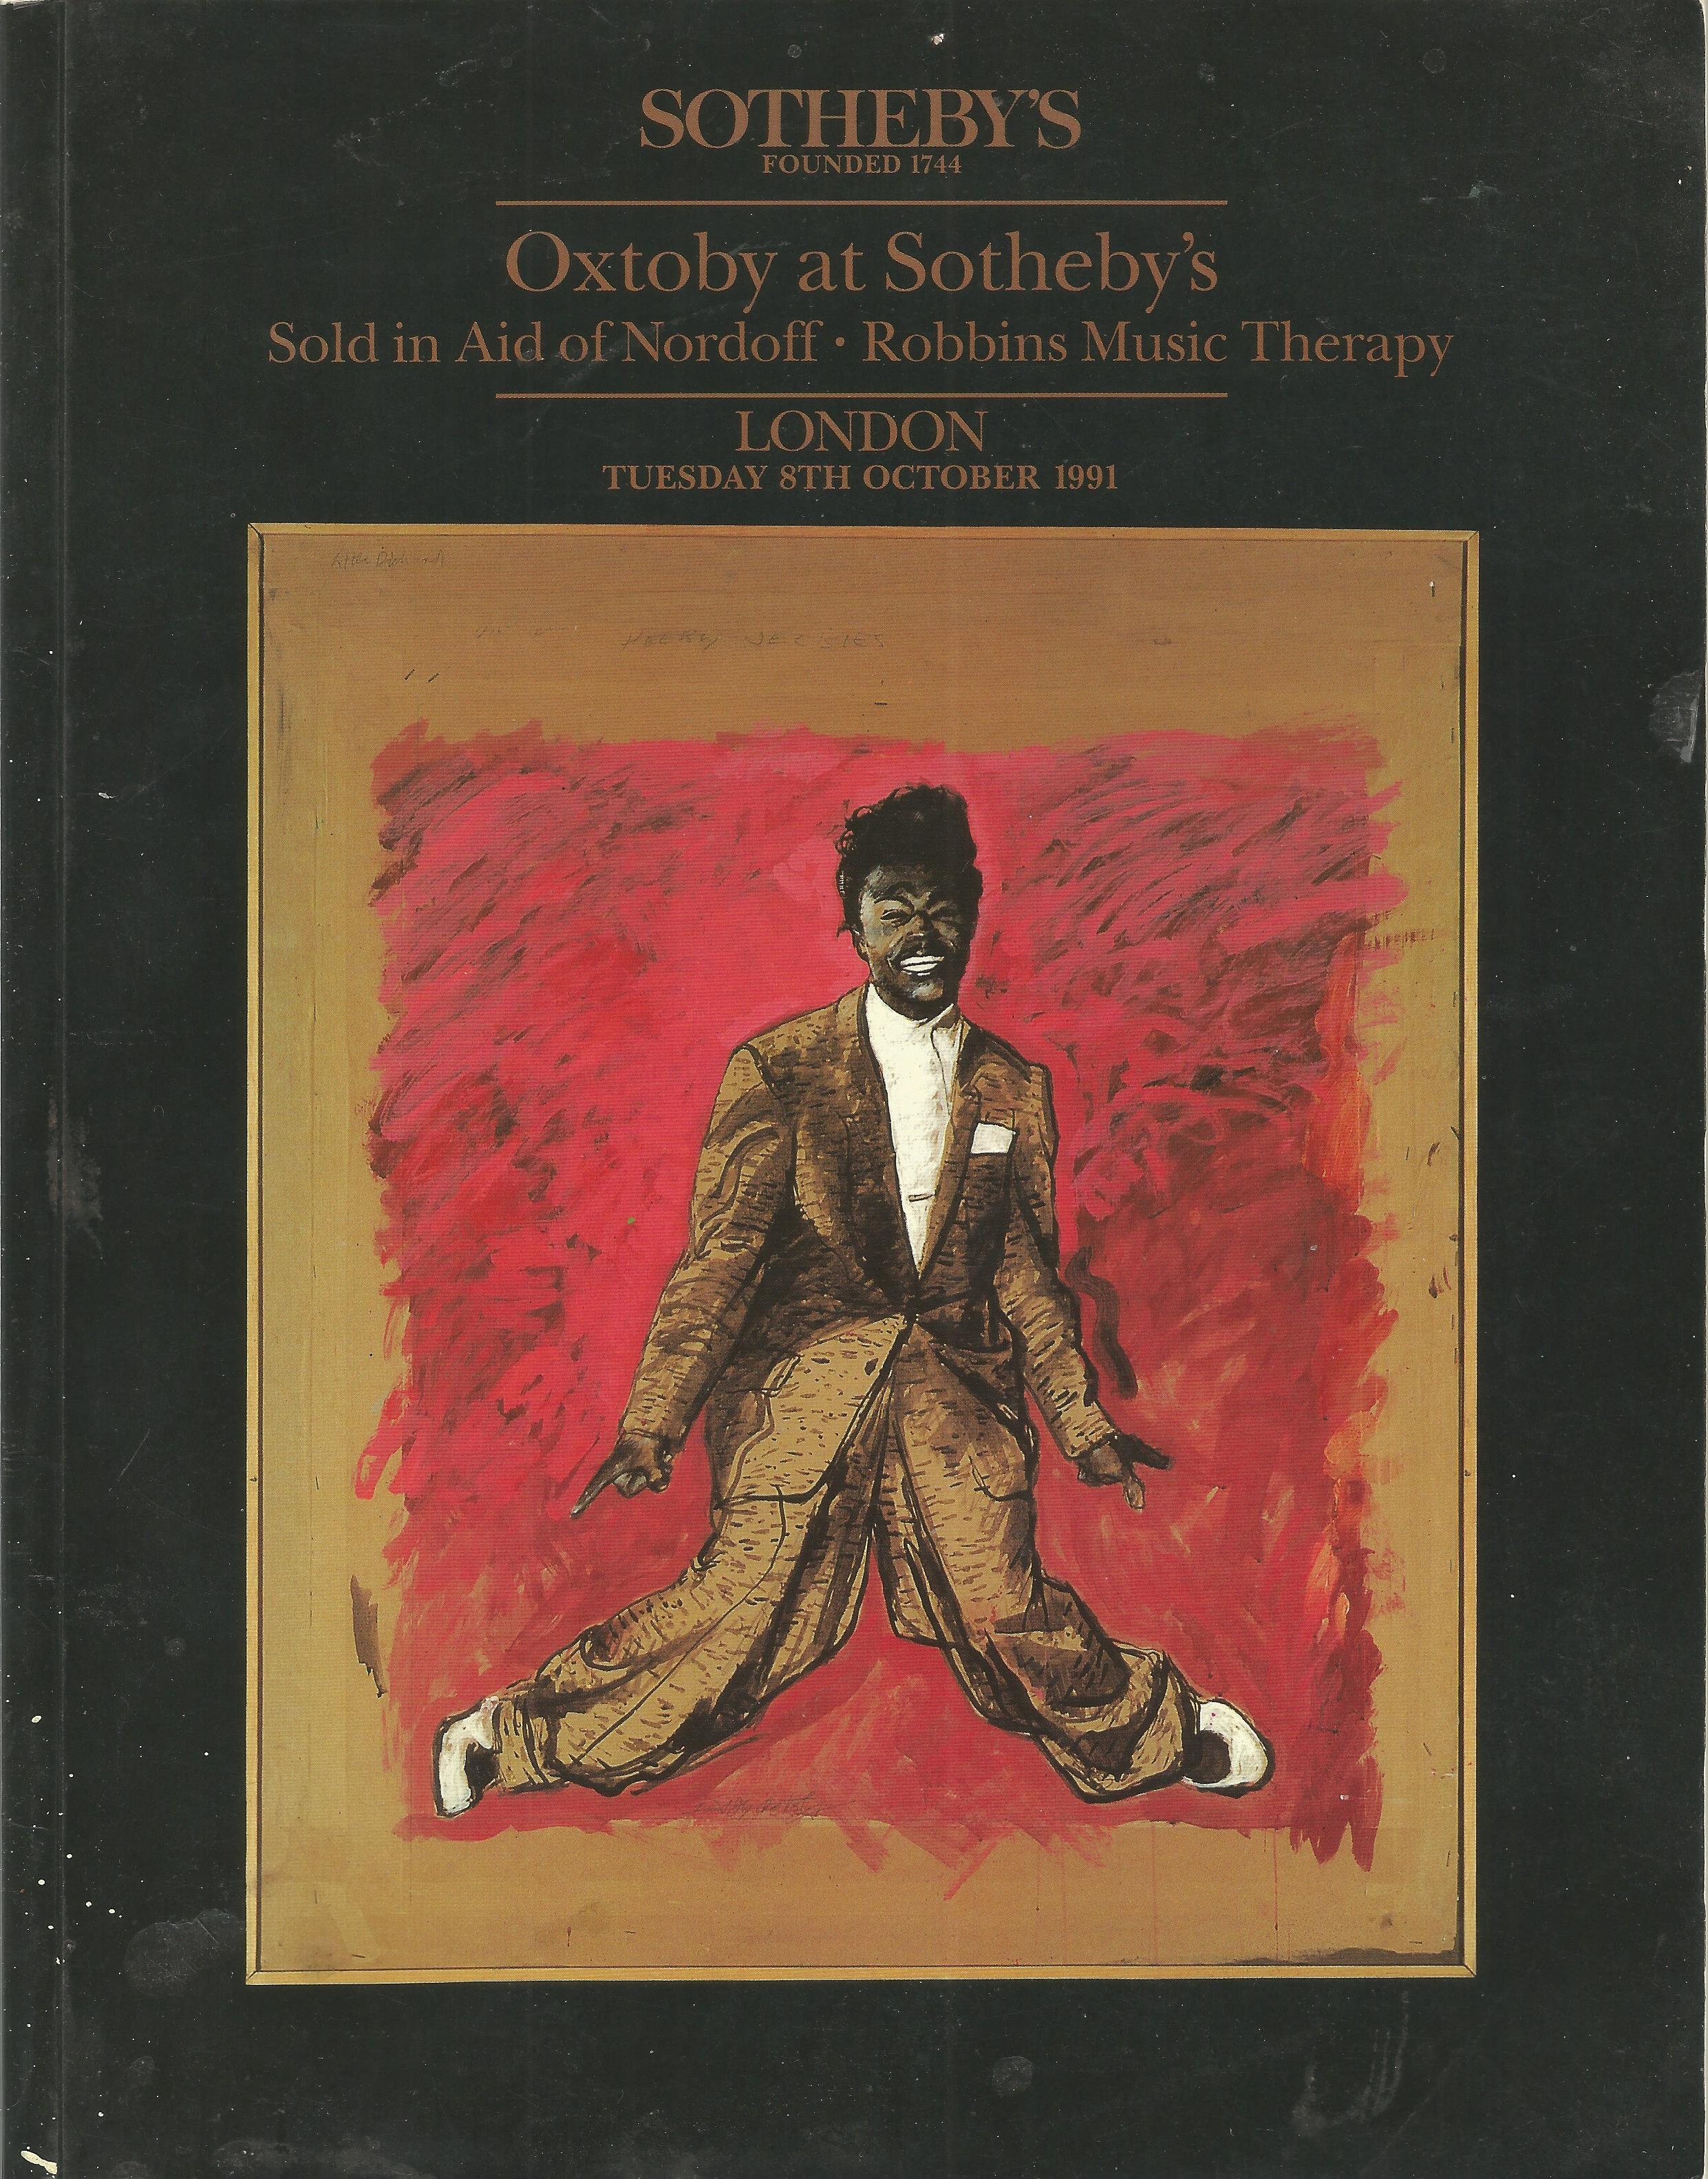 Oxtoby at Sotheby's 100 Indian Ink Paintings of Musicians of the 50s Softback Book 1991 printed by